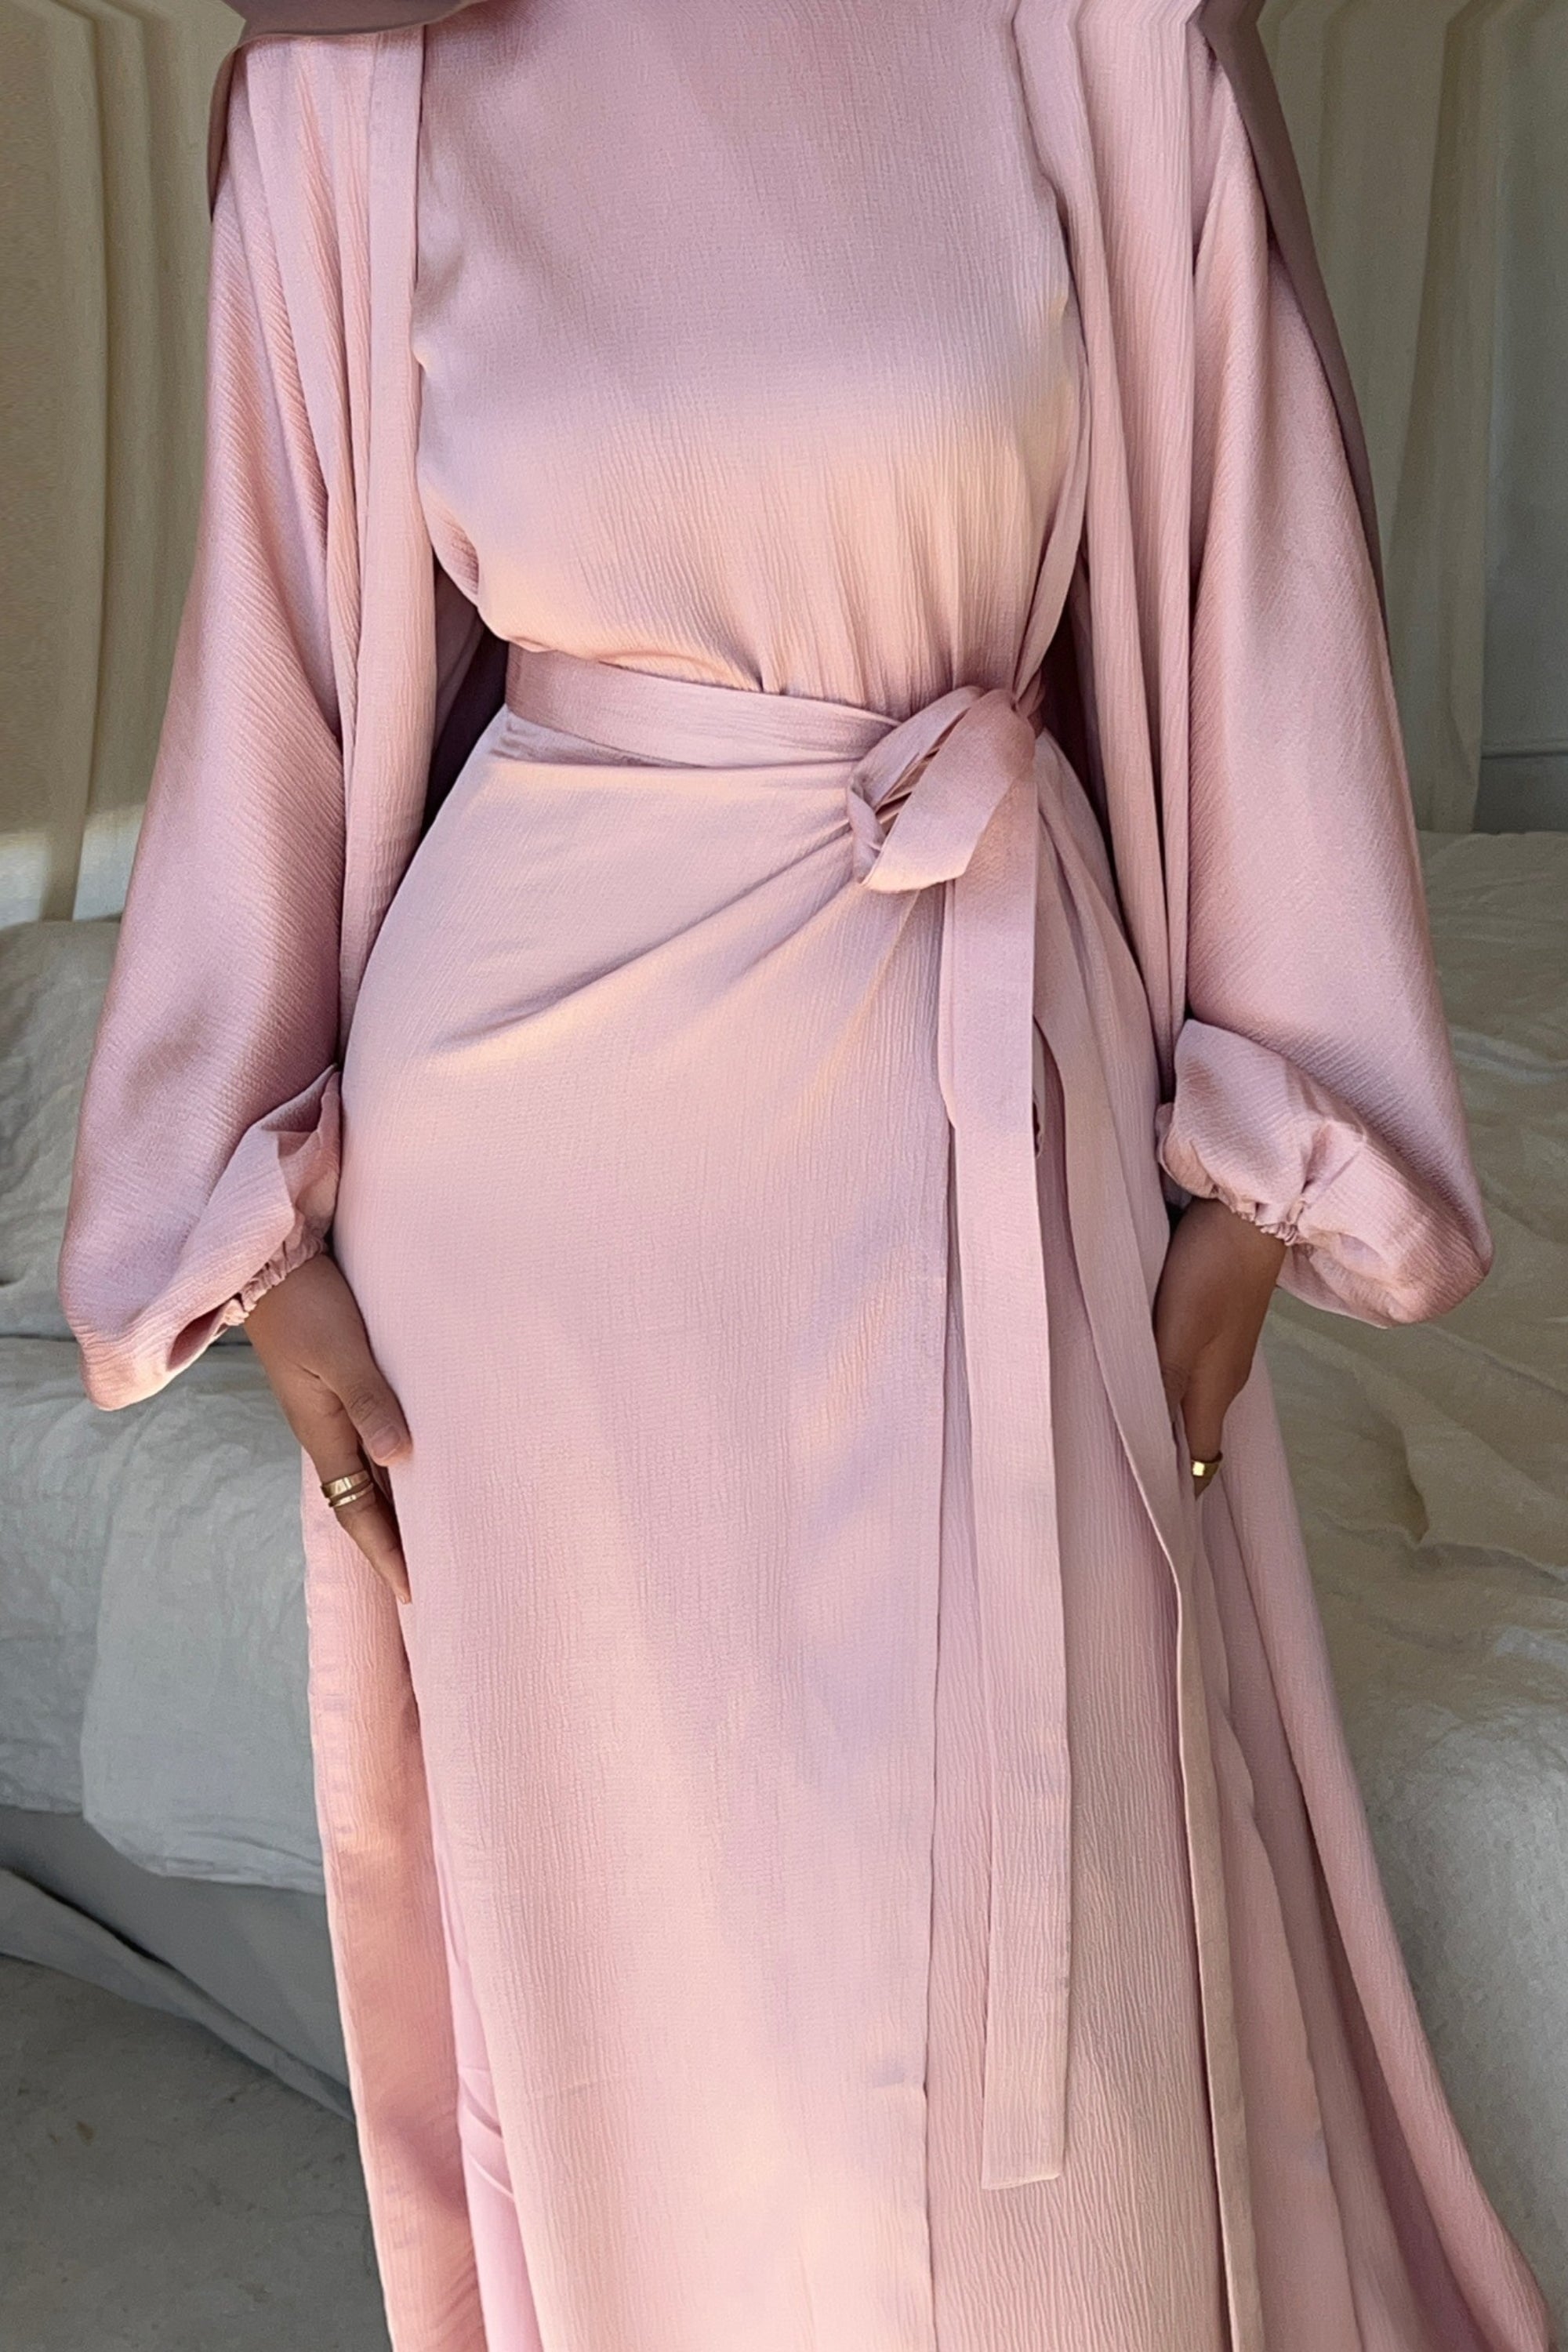 Umbrella Abaya With Bell Sleeves- Puce Pink - Being Traditional - 3217340